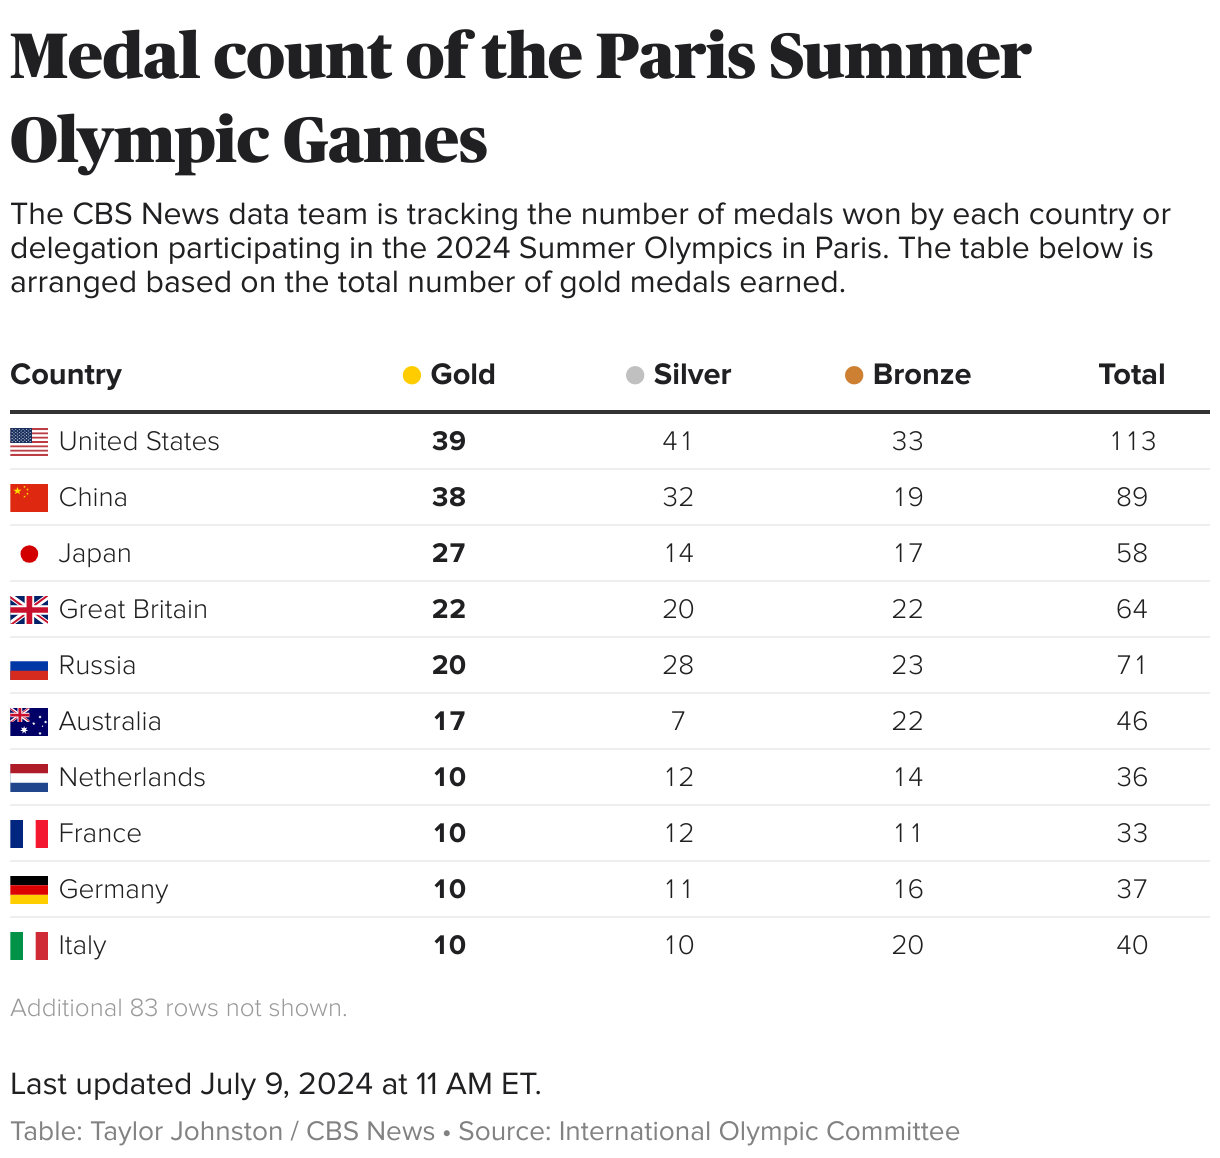 Table showing the number of medals won by each country or delegation in the 2024 Summer Olympics in Paris